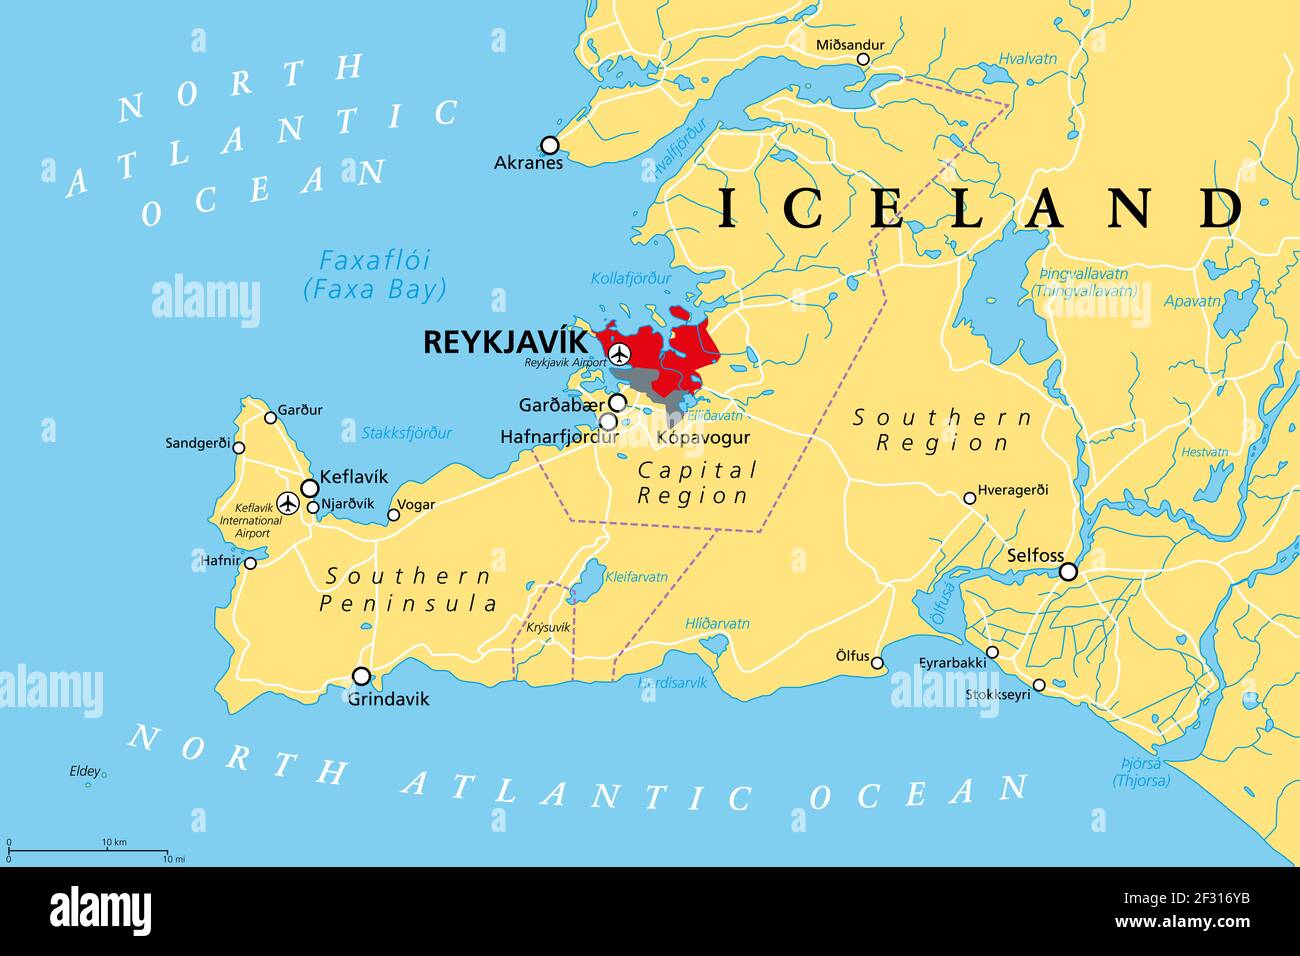 Iceland, Capital Region and Southern Peninsula, political map. Reykjavik and vicinity, with Reykjanes Peninsula, a region in southwest Iceland. Stock Photo